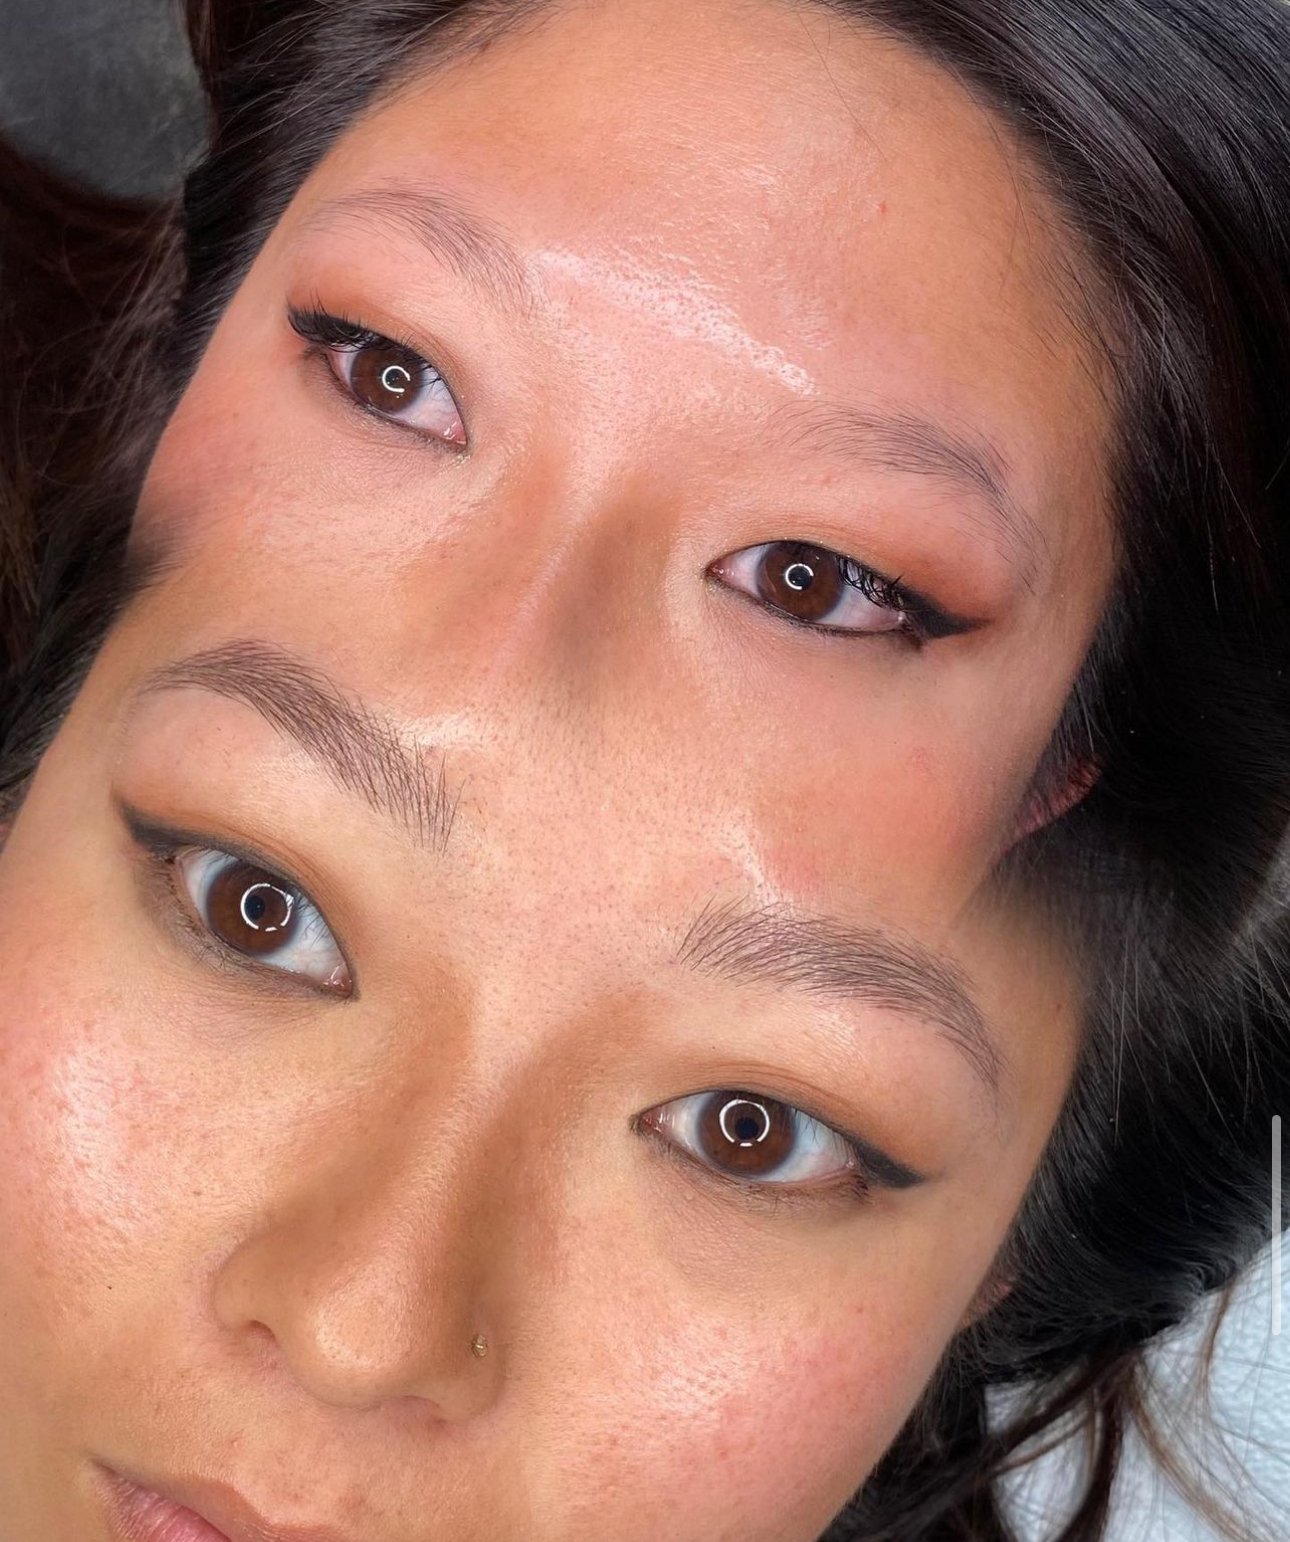 Check out these stunning Microbladed brows after two sessions of brow magic. Shelby achieved nothing short of PERFECTION and we are here for it! Say hello to brows that slay all day, every day! 

Artist: Shelby
Service: Microblading

#BrowGoals #Micr